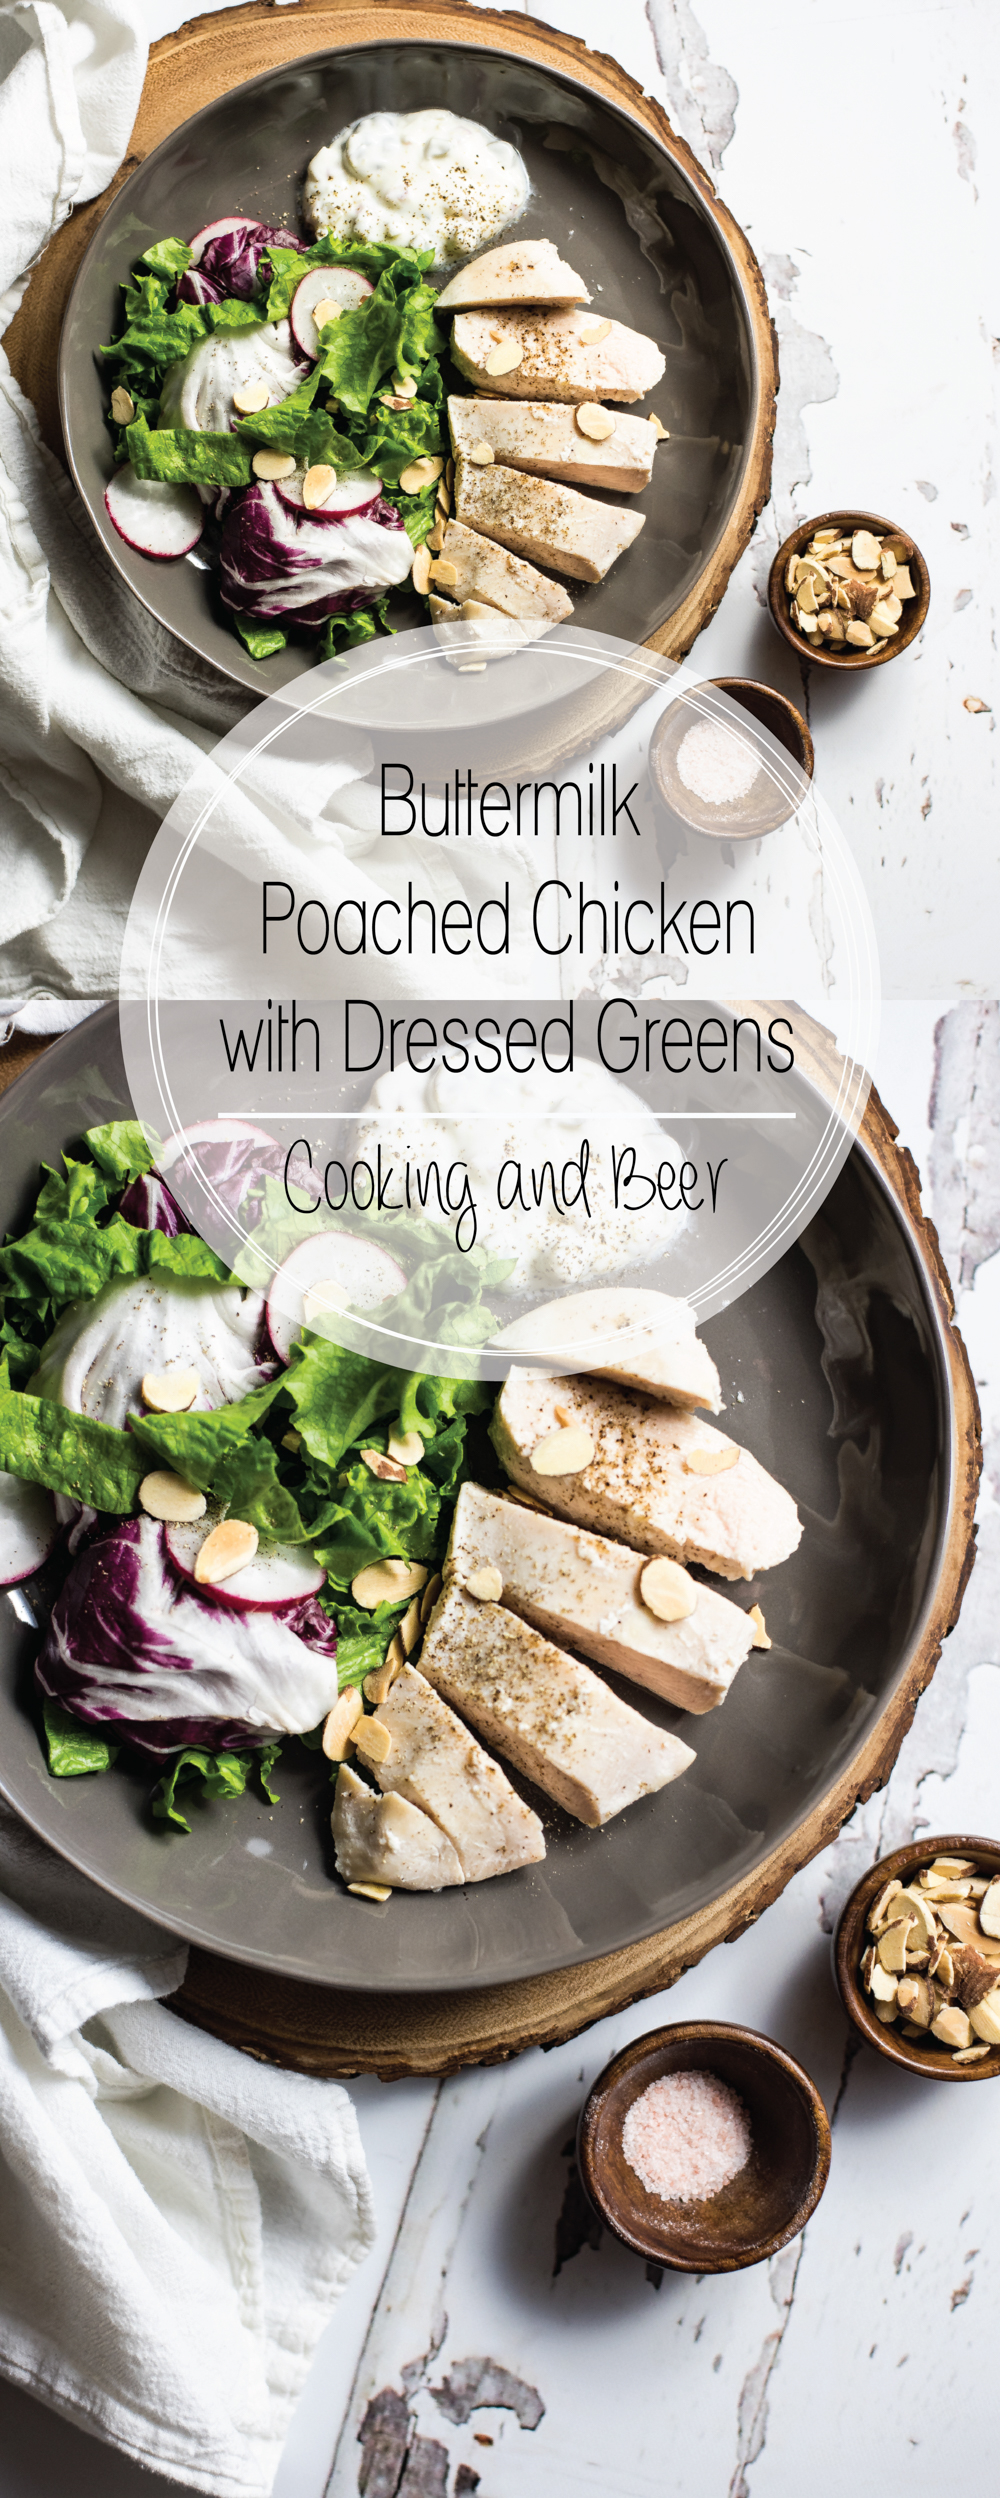 Buttermilk-poached chicken with dressed greens is a simple, yet delicious weeknight dinner recipe option. It is loaded with flavor and nutritional value!